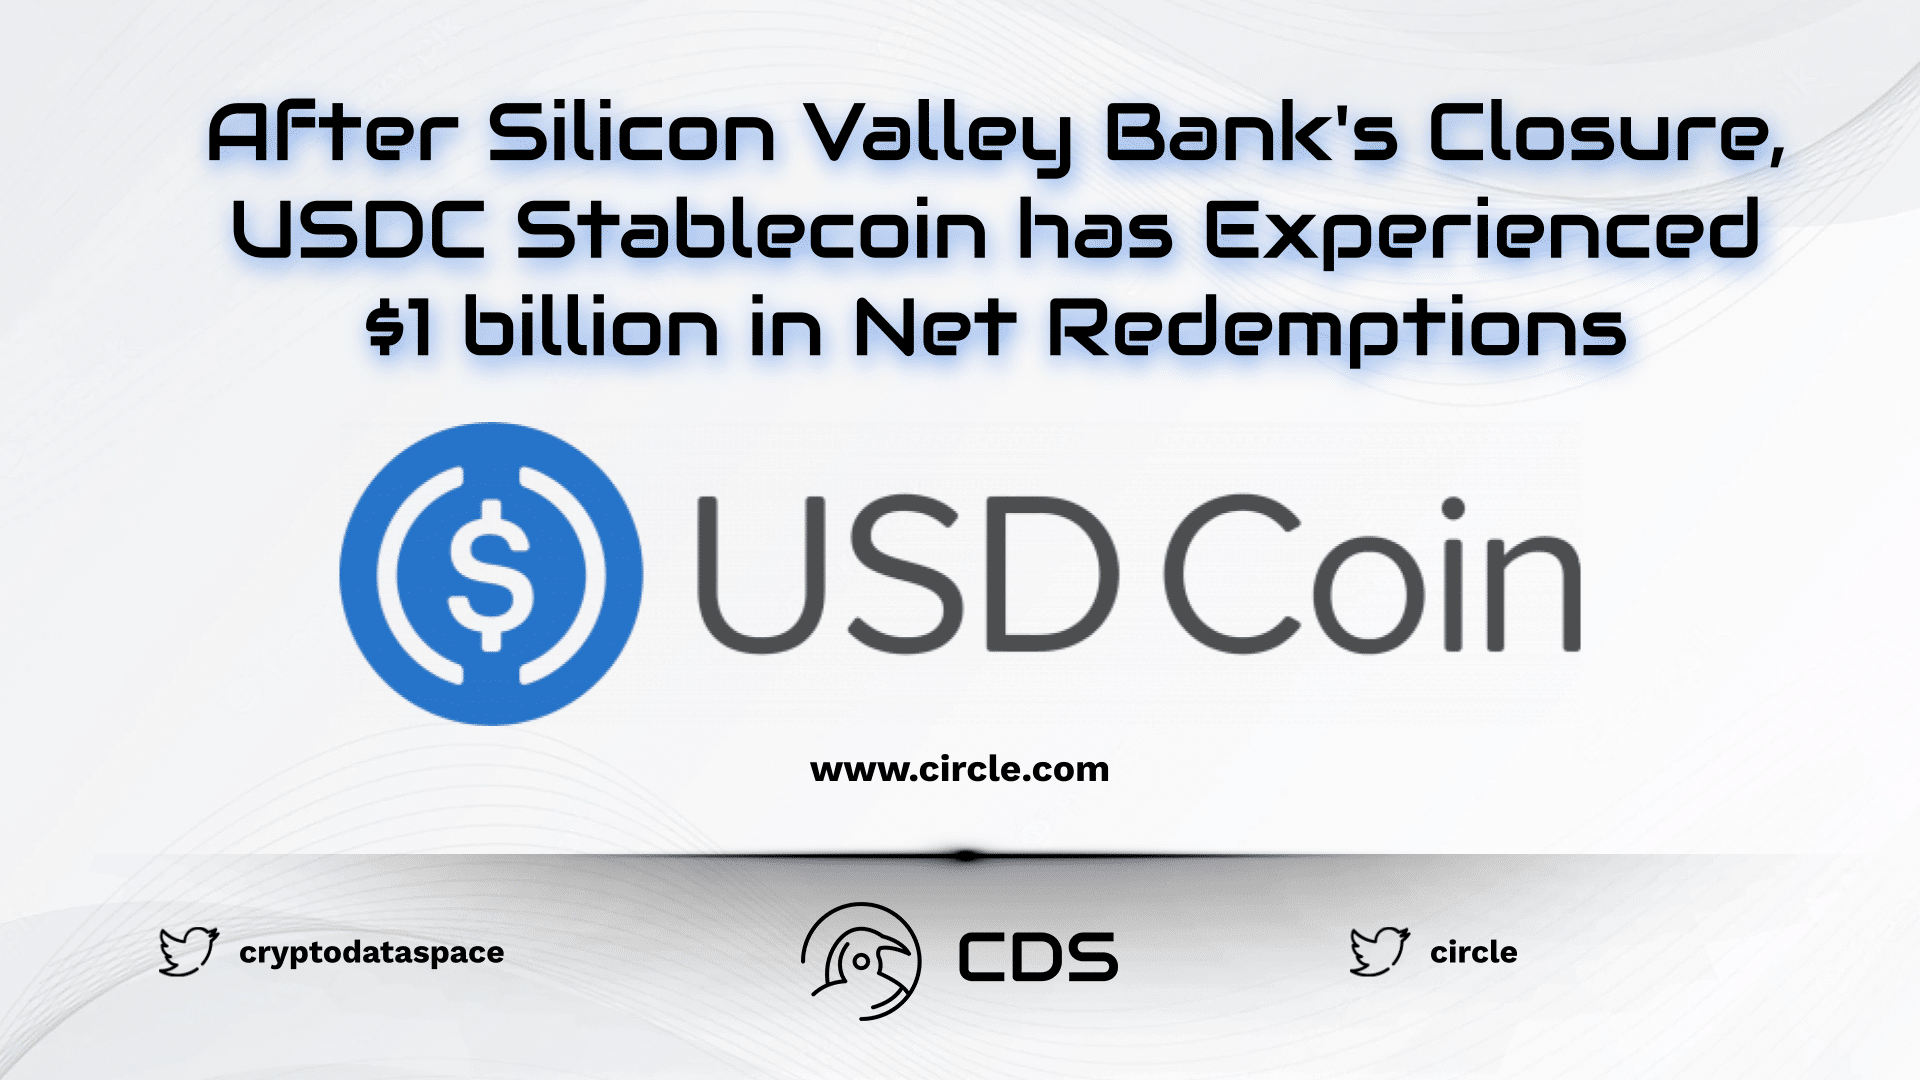 After Silicon Valley Bank's Closure, USDC Stablecoin has Experienced $1 billion in Net Redemptions